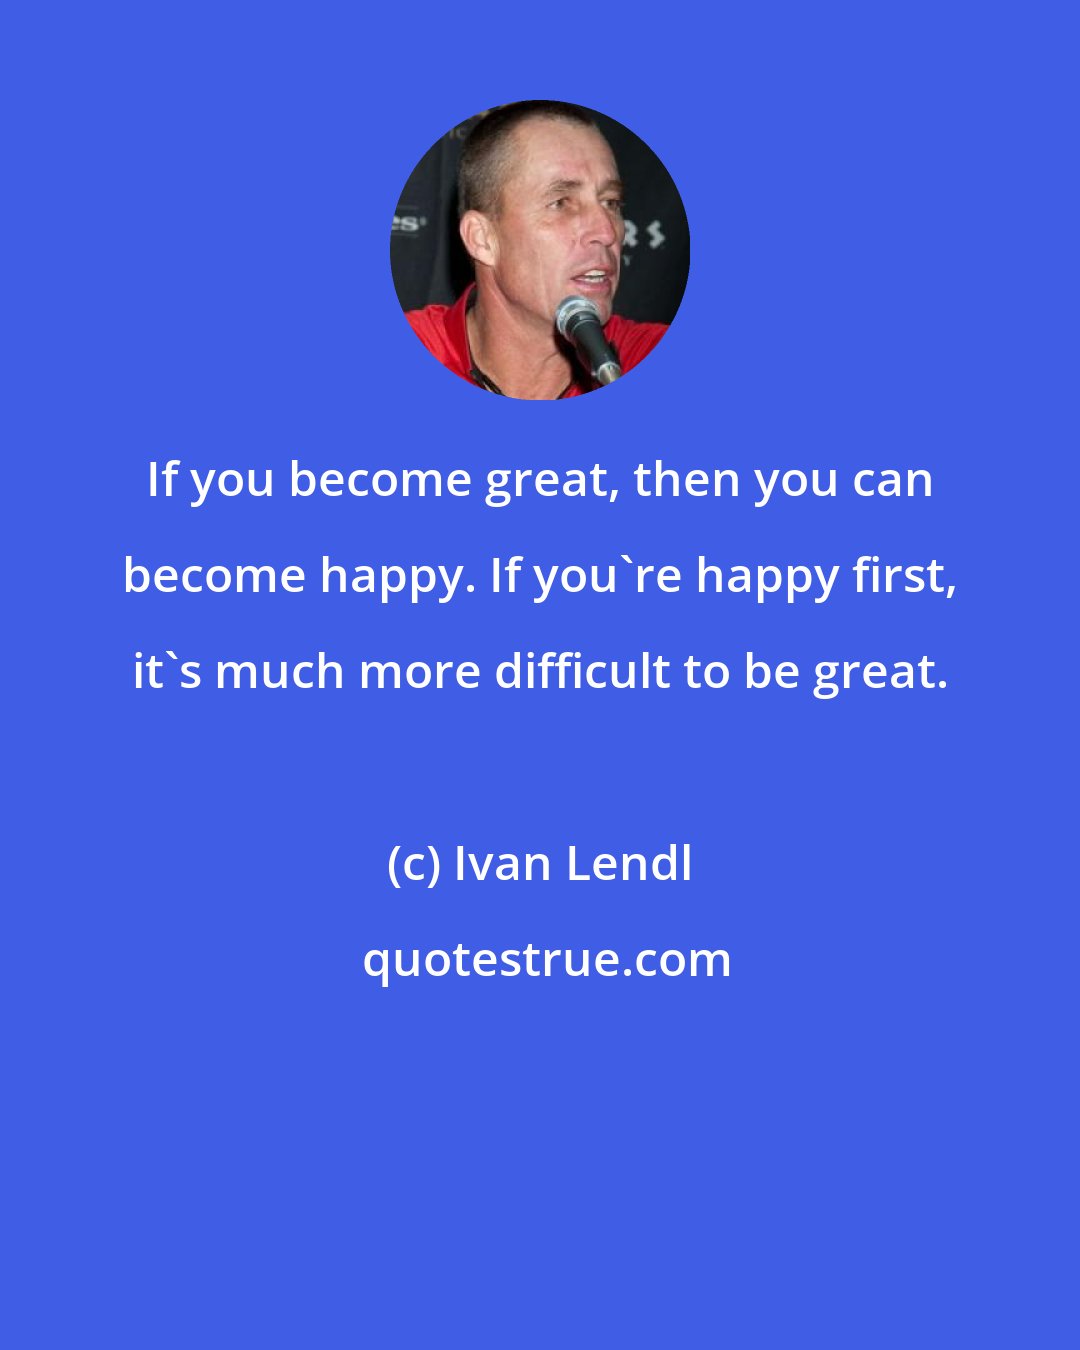 Ivan Lendl: If you become great, then you can become happy. If you're happy first, it's much more difficult to be great.